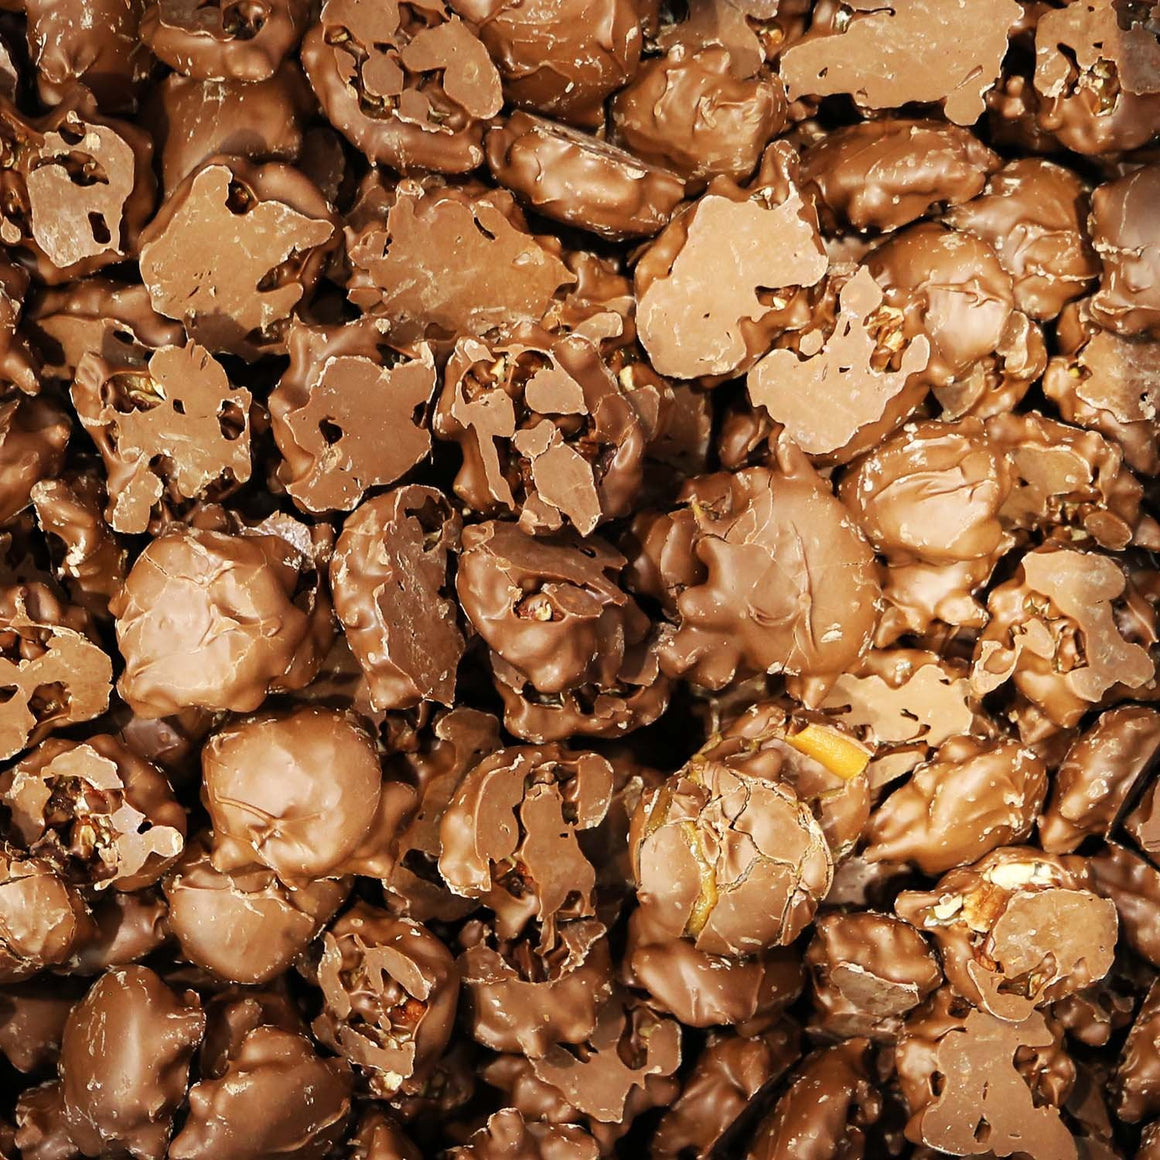 All City Candy Zachary Chocolate Caramel Pecan Clusters 3 lb. Bulk Bag Bulk Unwrapped Zachary For fresh candy and great service, visit www.allcitycandy.com